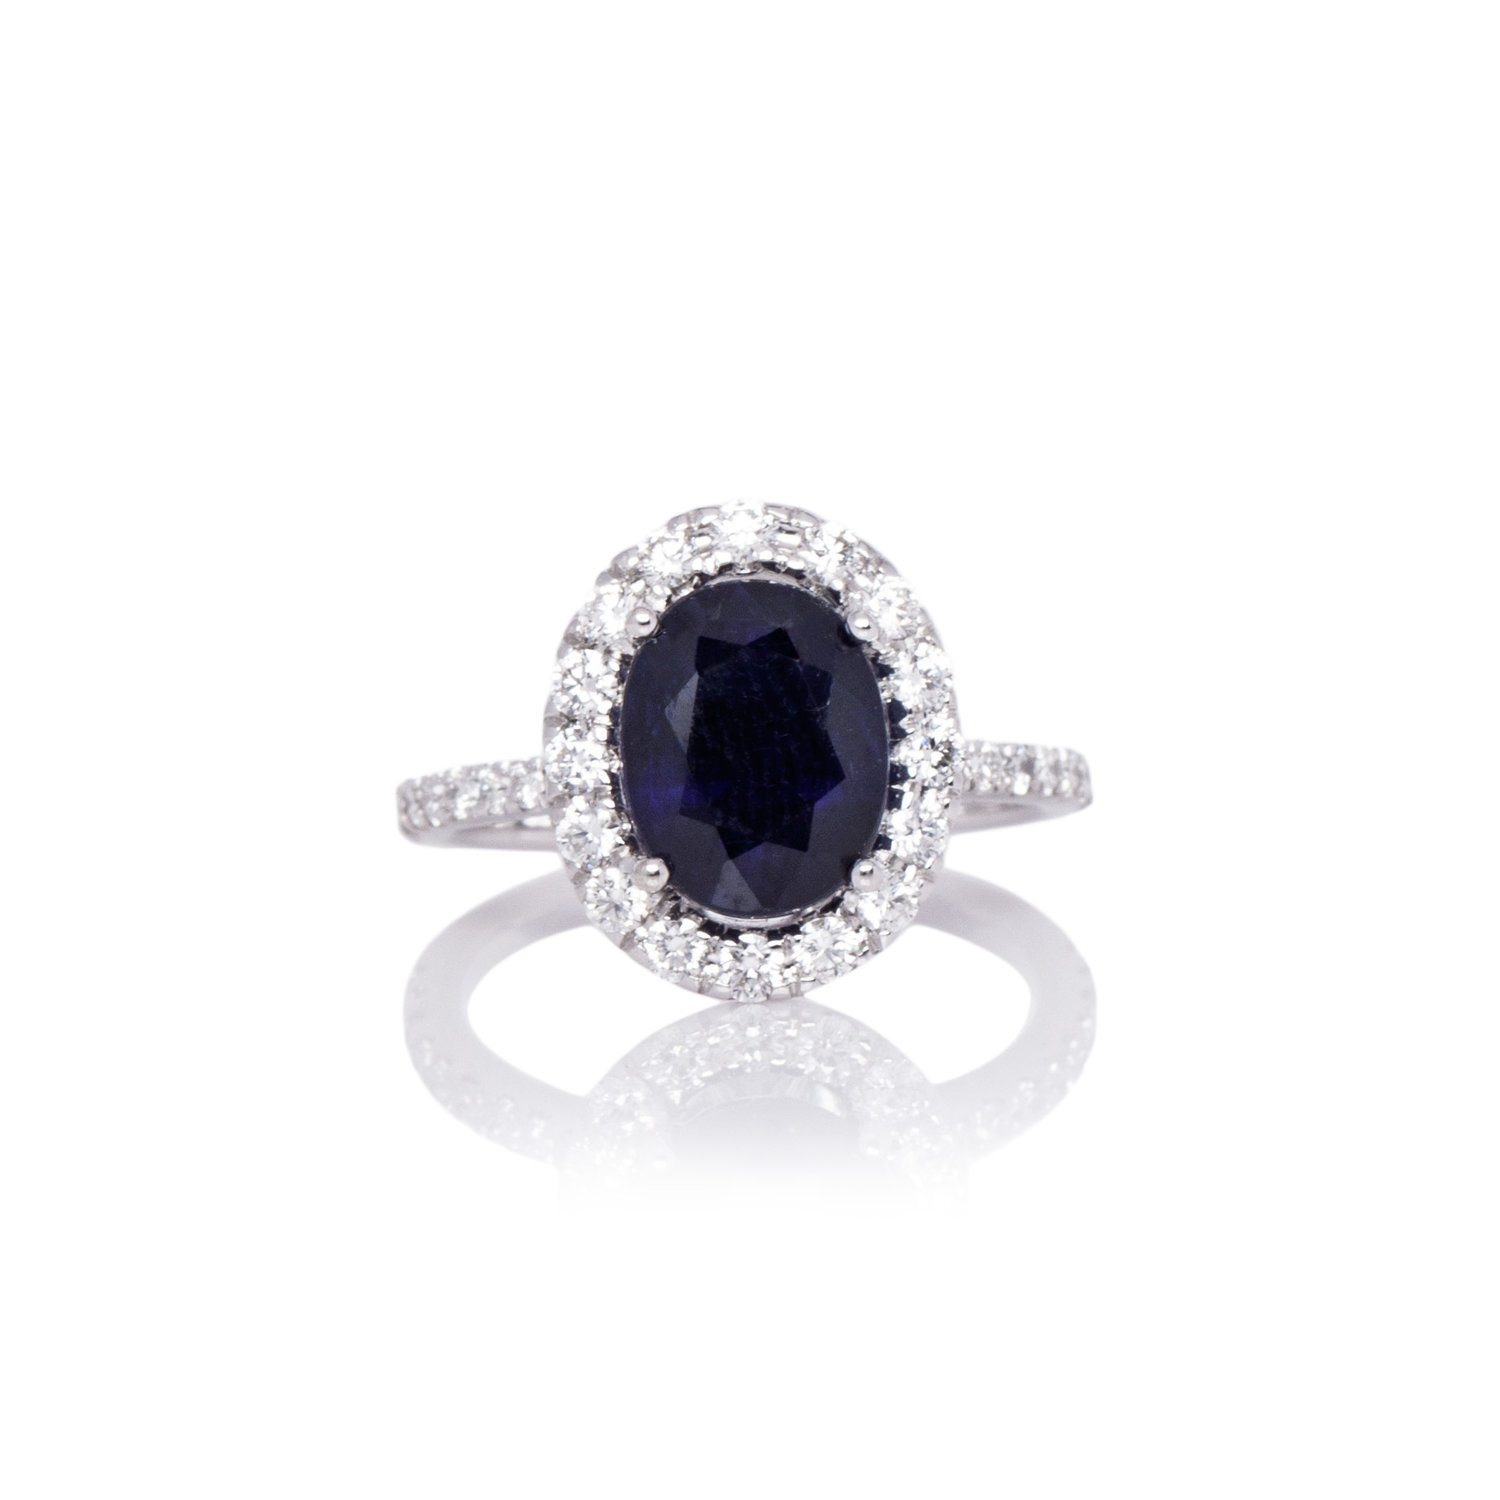 101-continental-jewels-manufacturers-ring-cjr000101-18k-white-gold-vvs1-diamonds-blue-sapphire-oval-ring.jpg